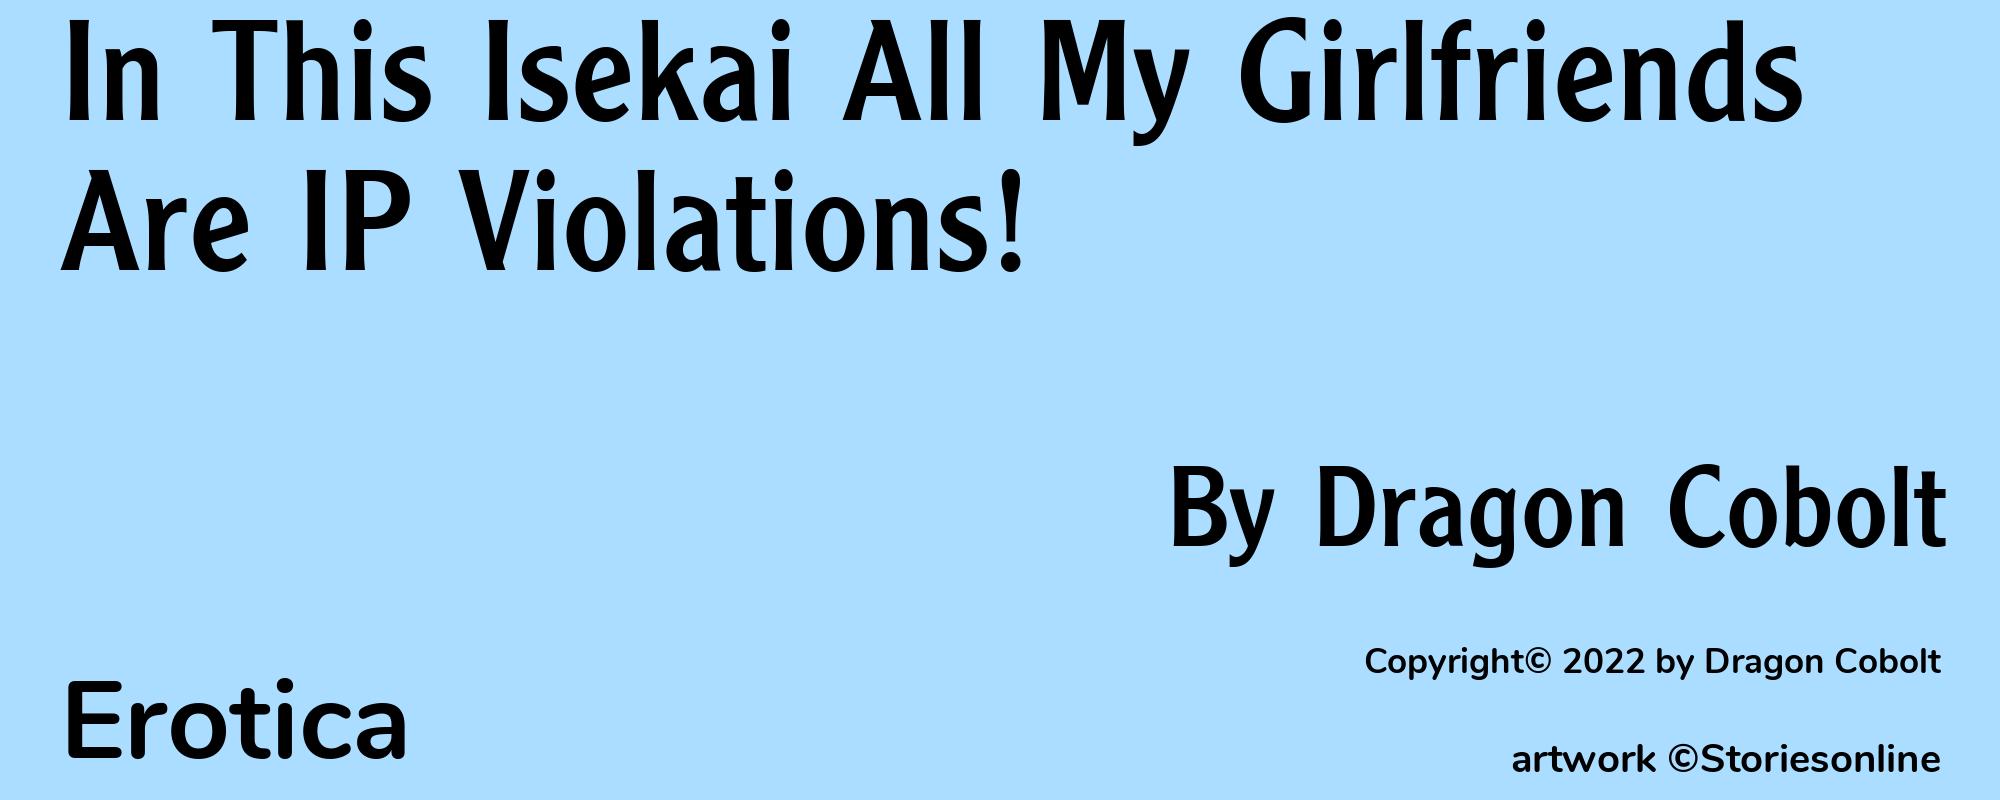 In This Isekai All My Girlfriends Are IP Violations! - Cover